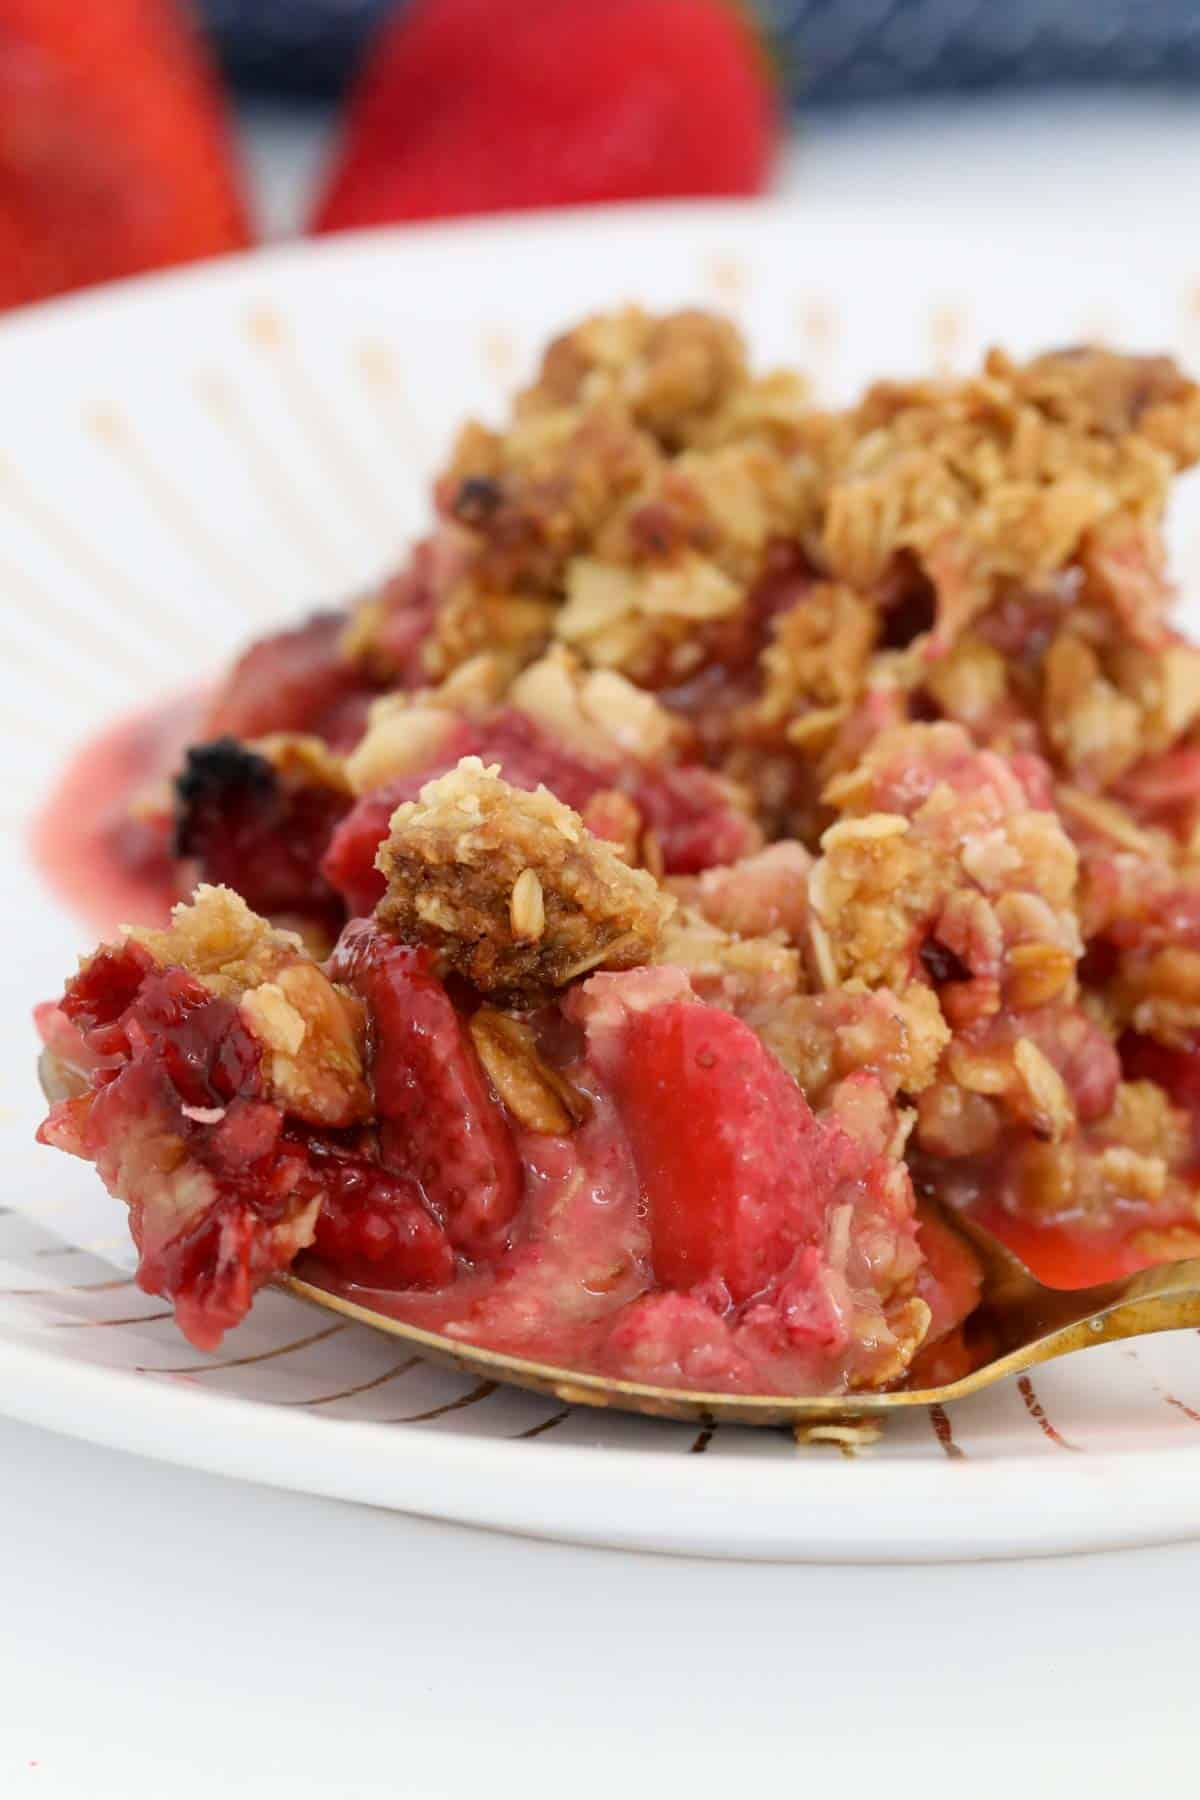 A close up of a spoonful of baked fruit dessert with crunchy rolled oat topping on a plate.